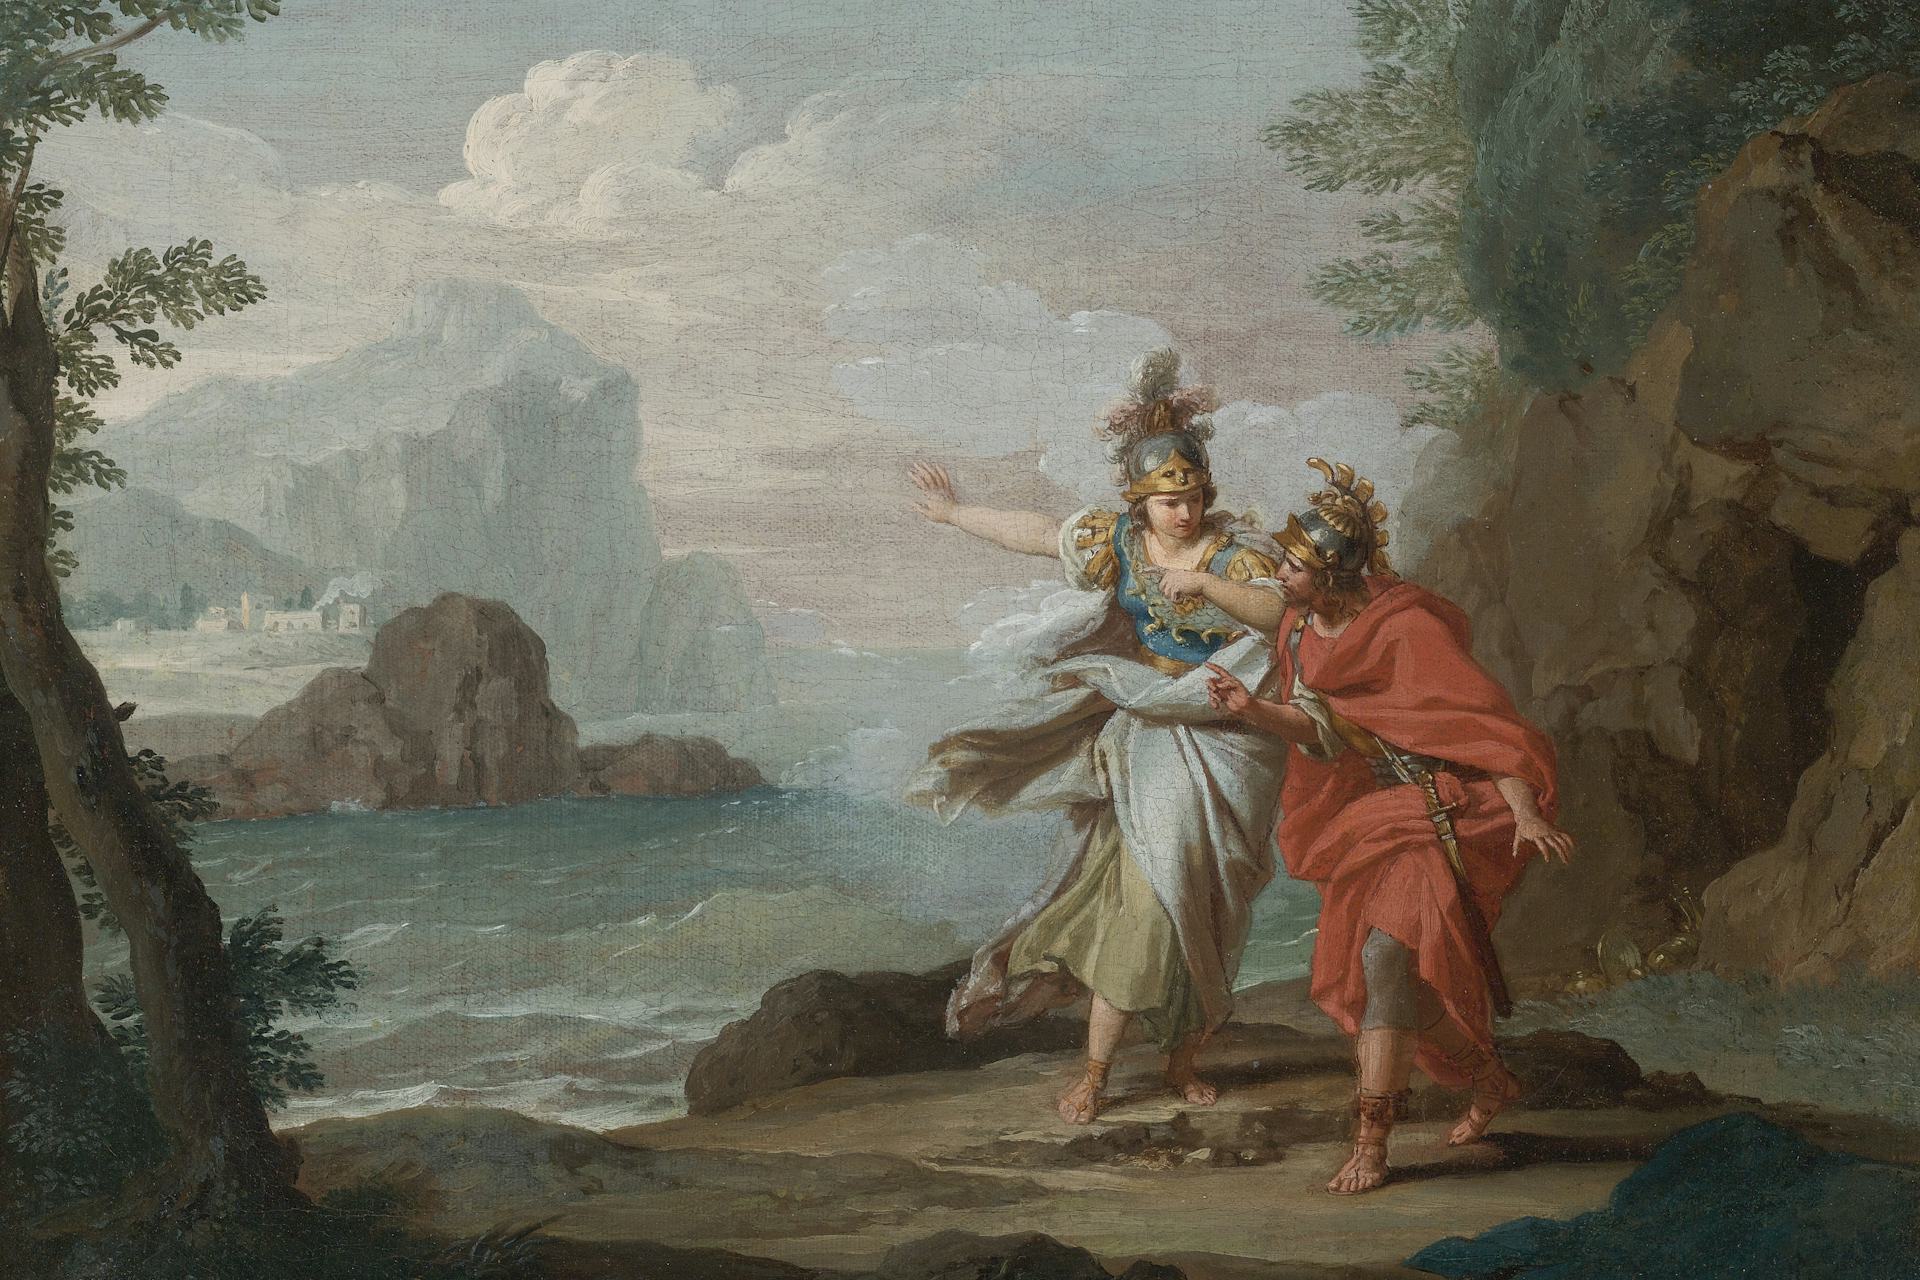 Athena Appearing to Odysseus to Reveal the Island of Ithaca by Giuseppe Bottani